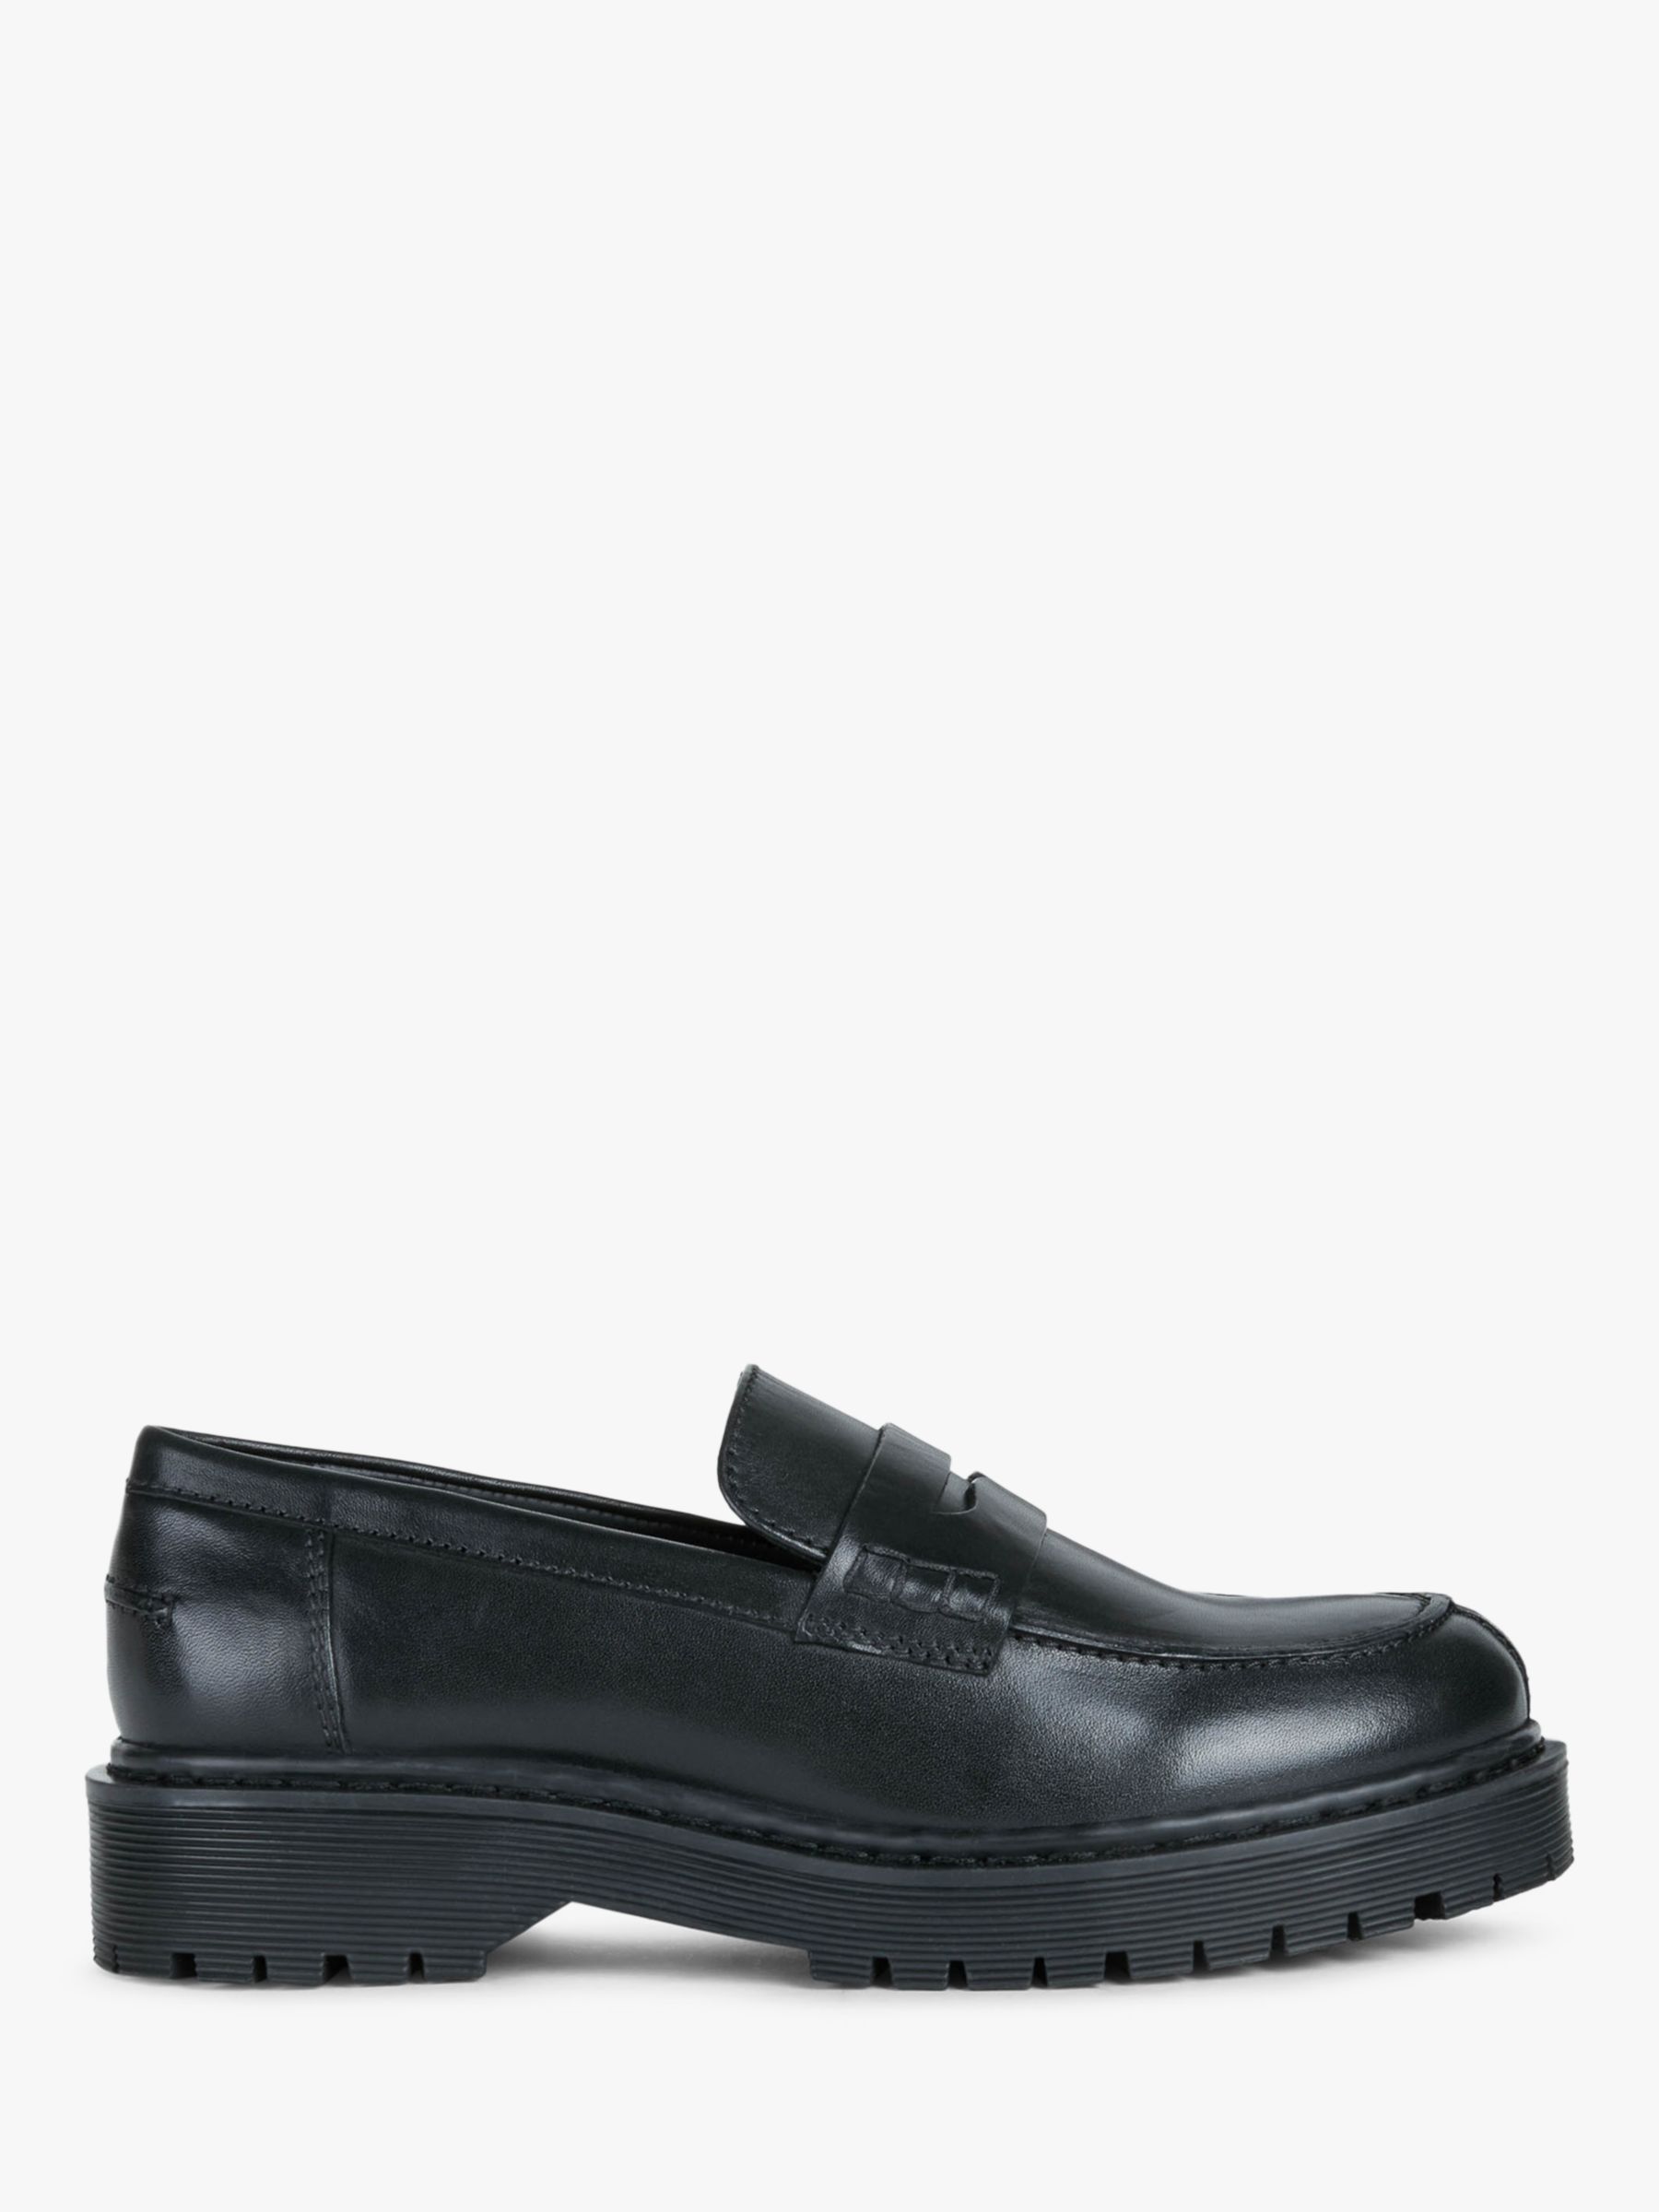 Geox Women's Bleyze Leather Chunky Loafers, Black at John Lewis & Partners